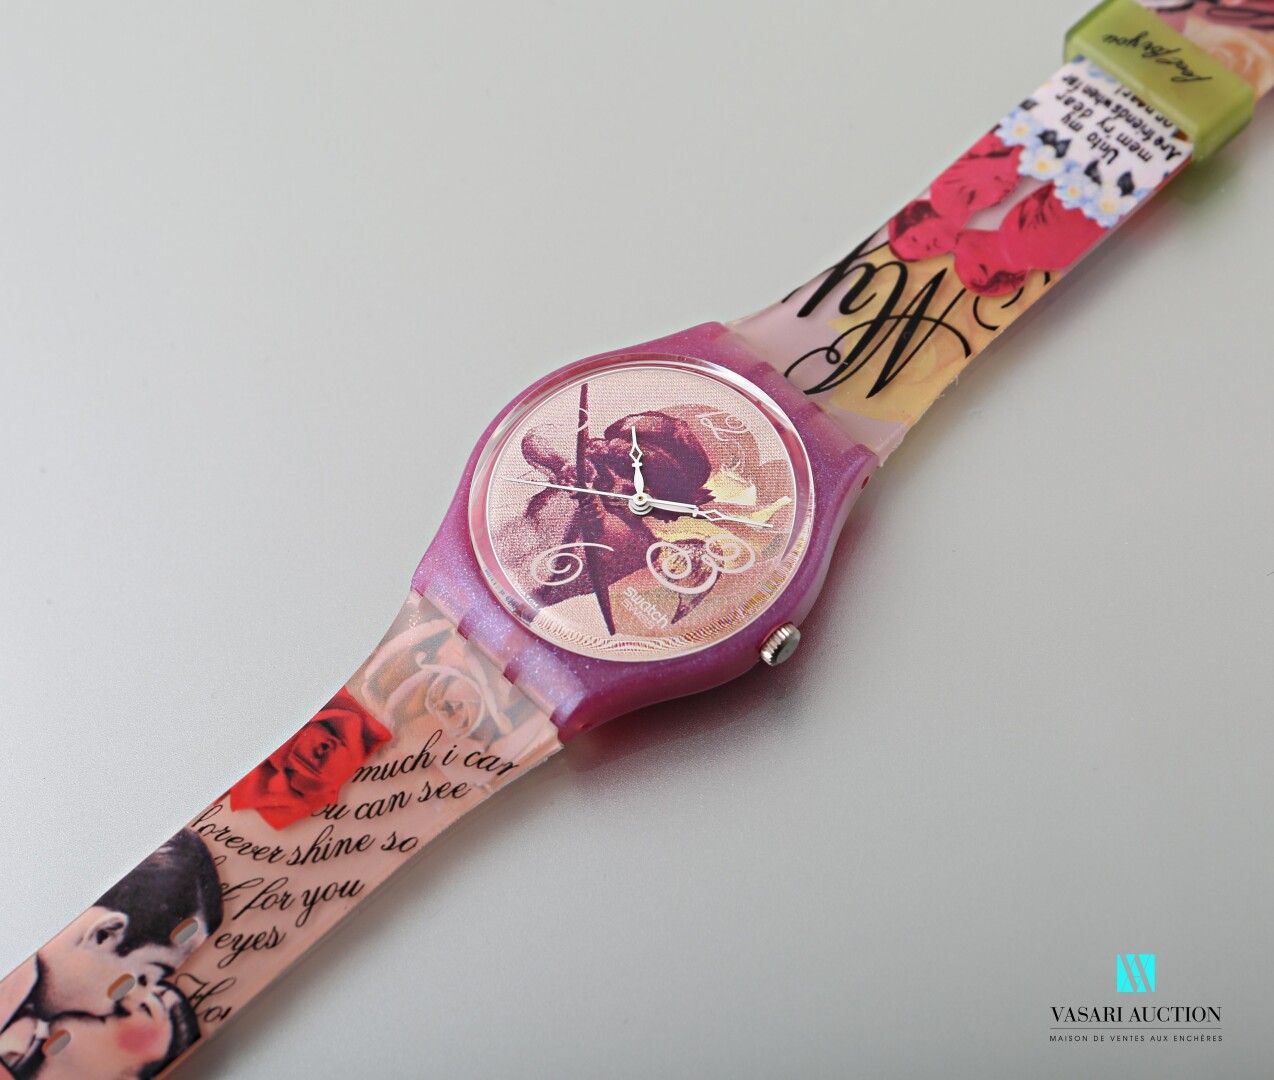 Null SWATCH - FOR YOU HEART ONLY - 1995

Gehäuse und Armband aus Kunststoff.

Uh&hellip;